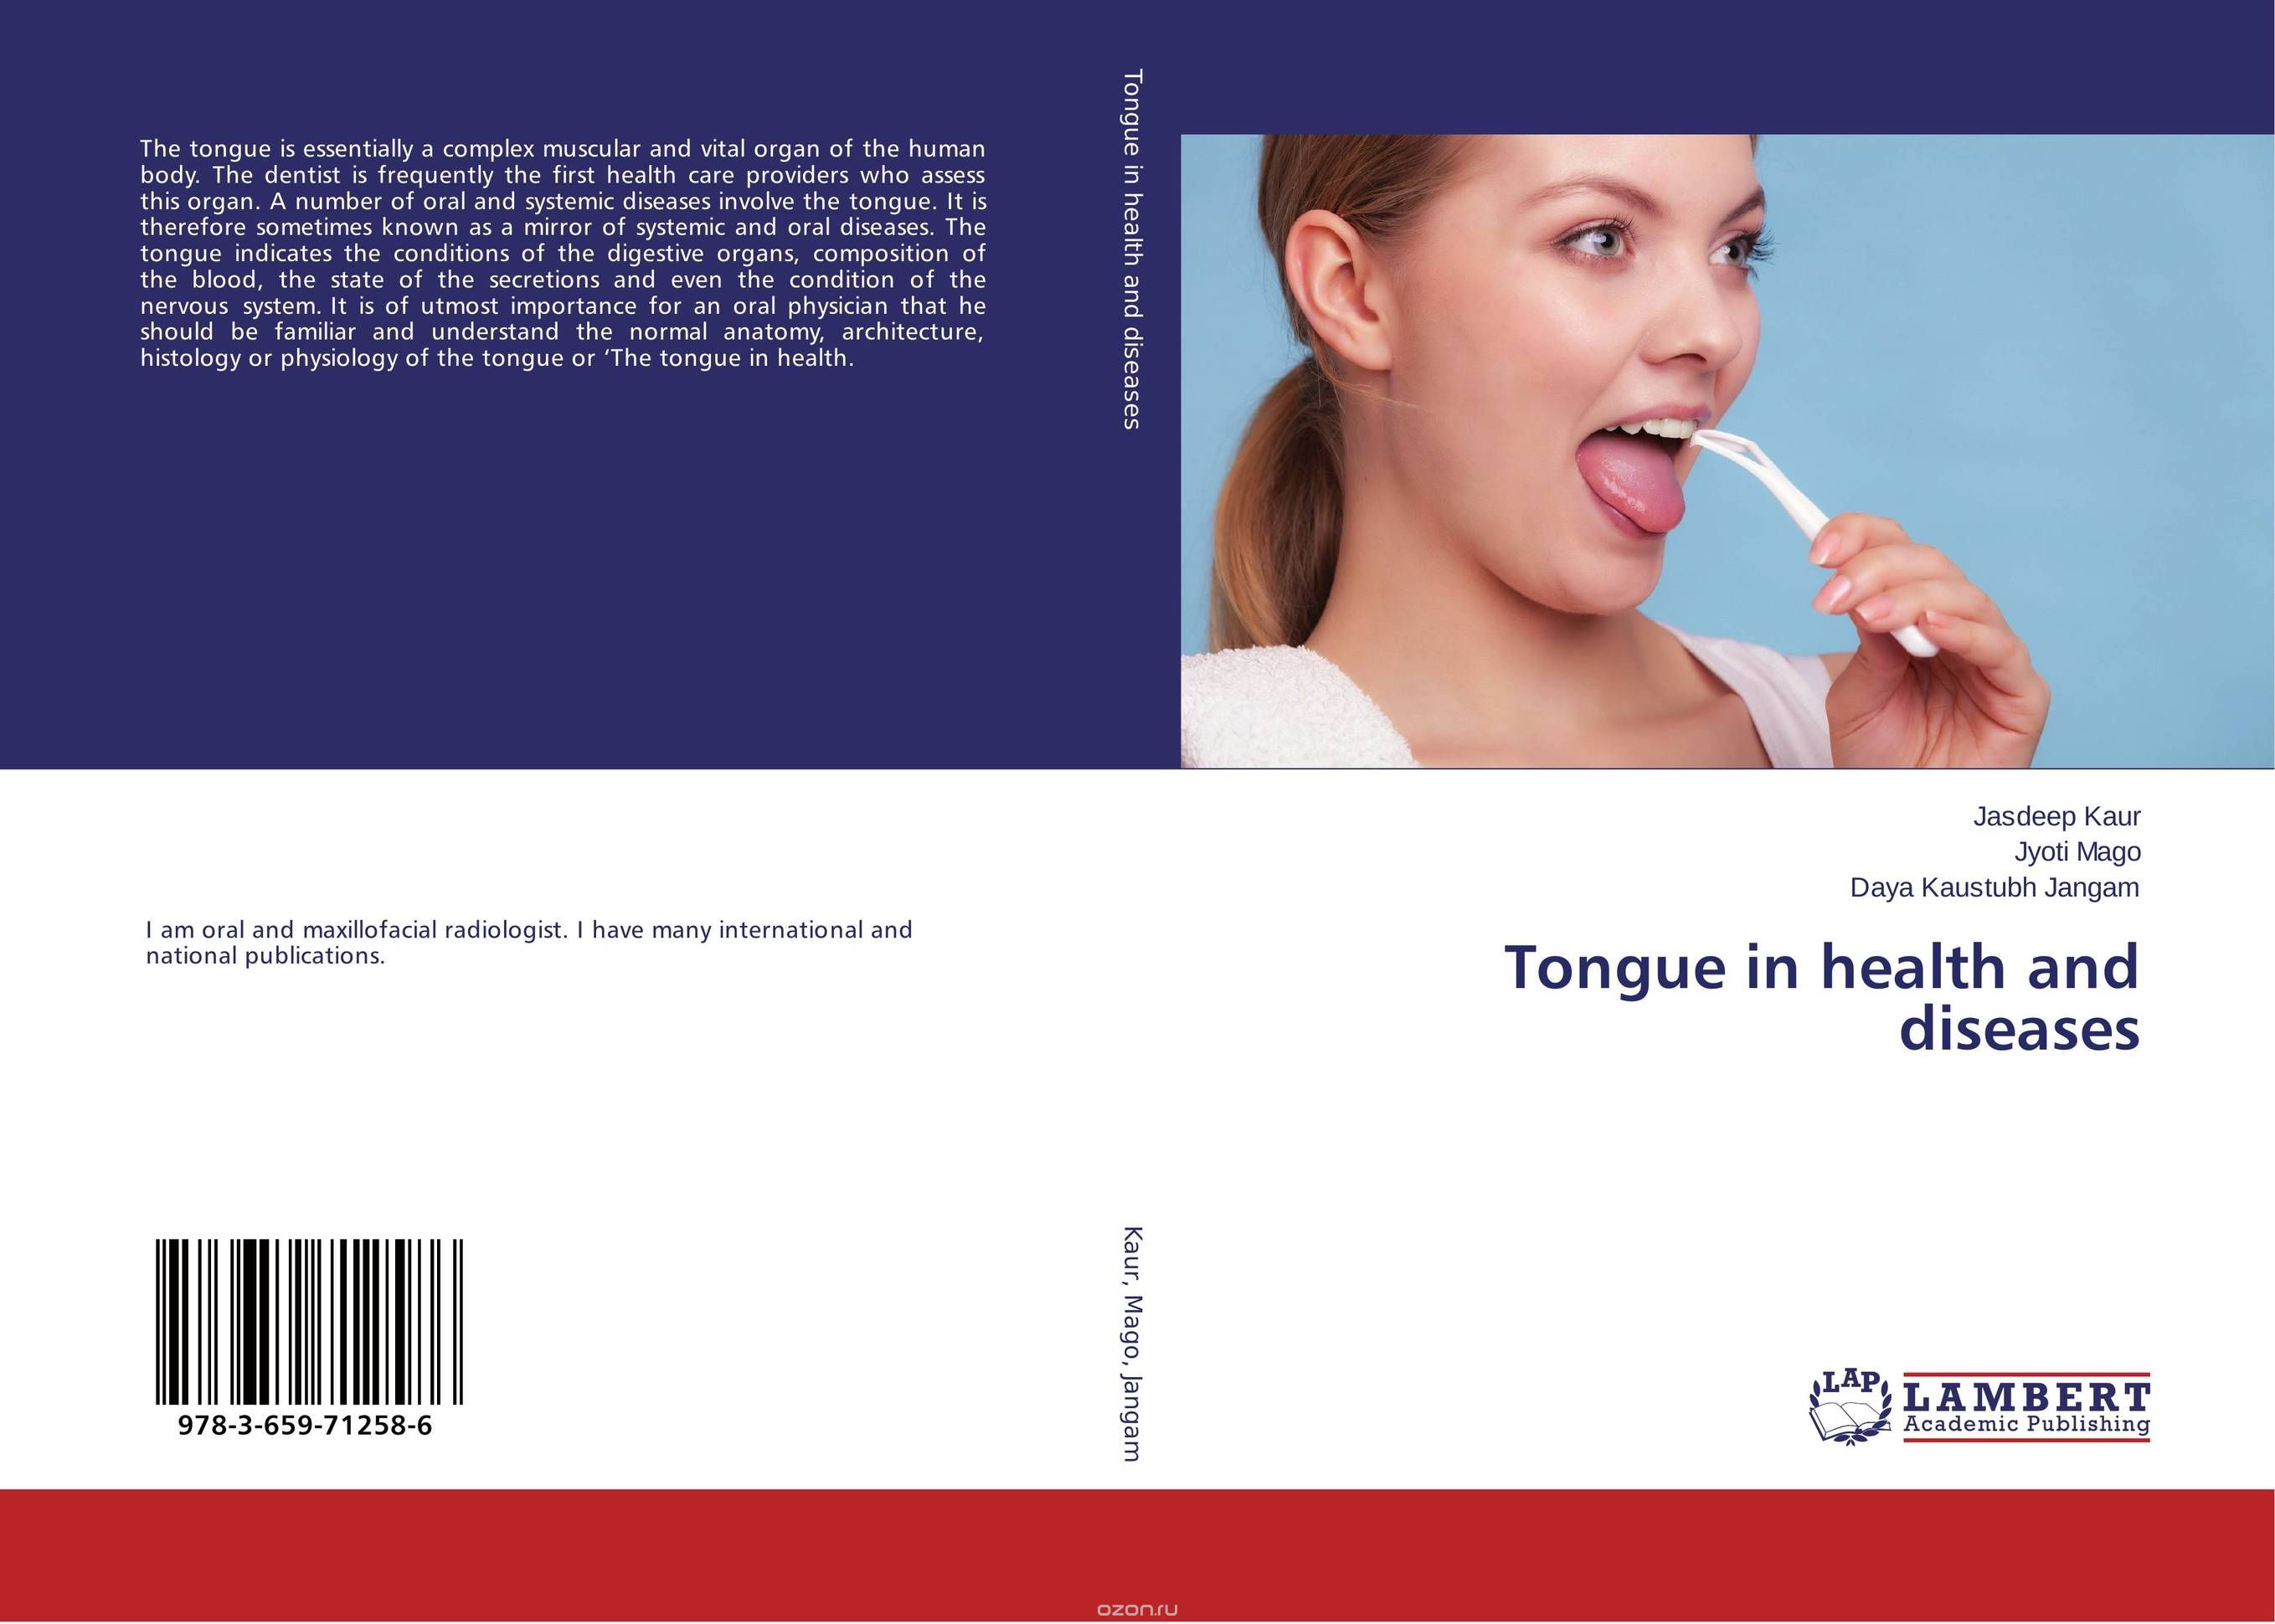 Tongue in health and diseases